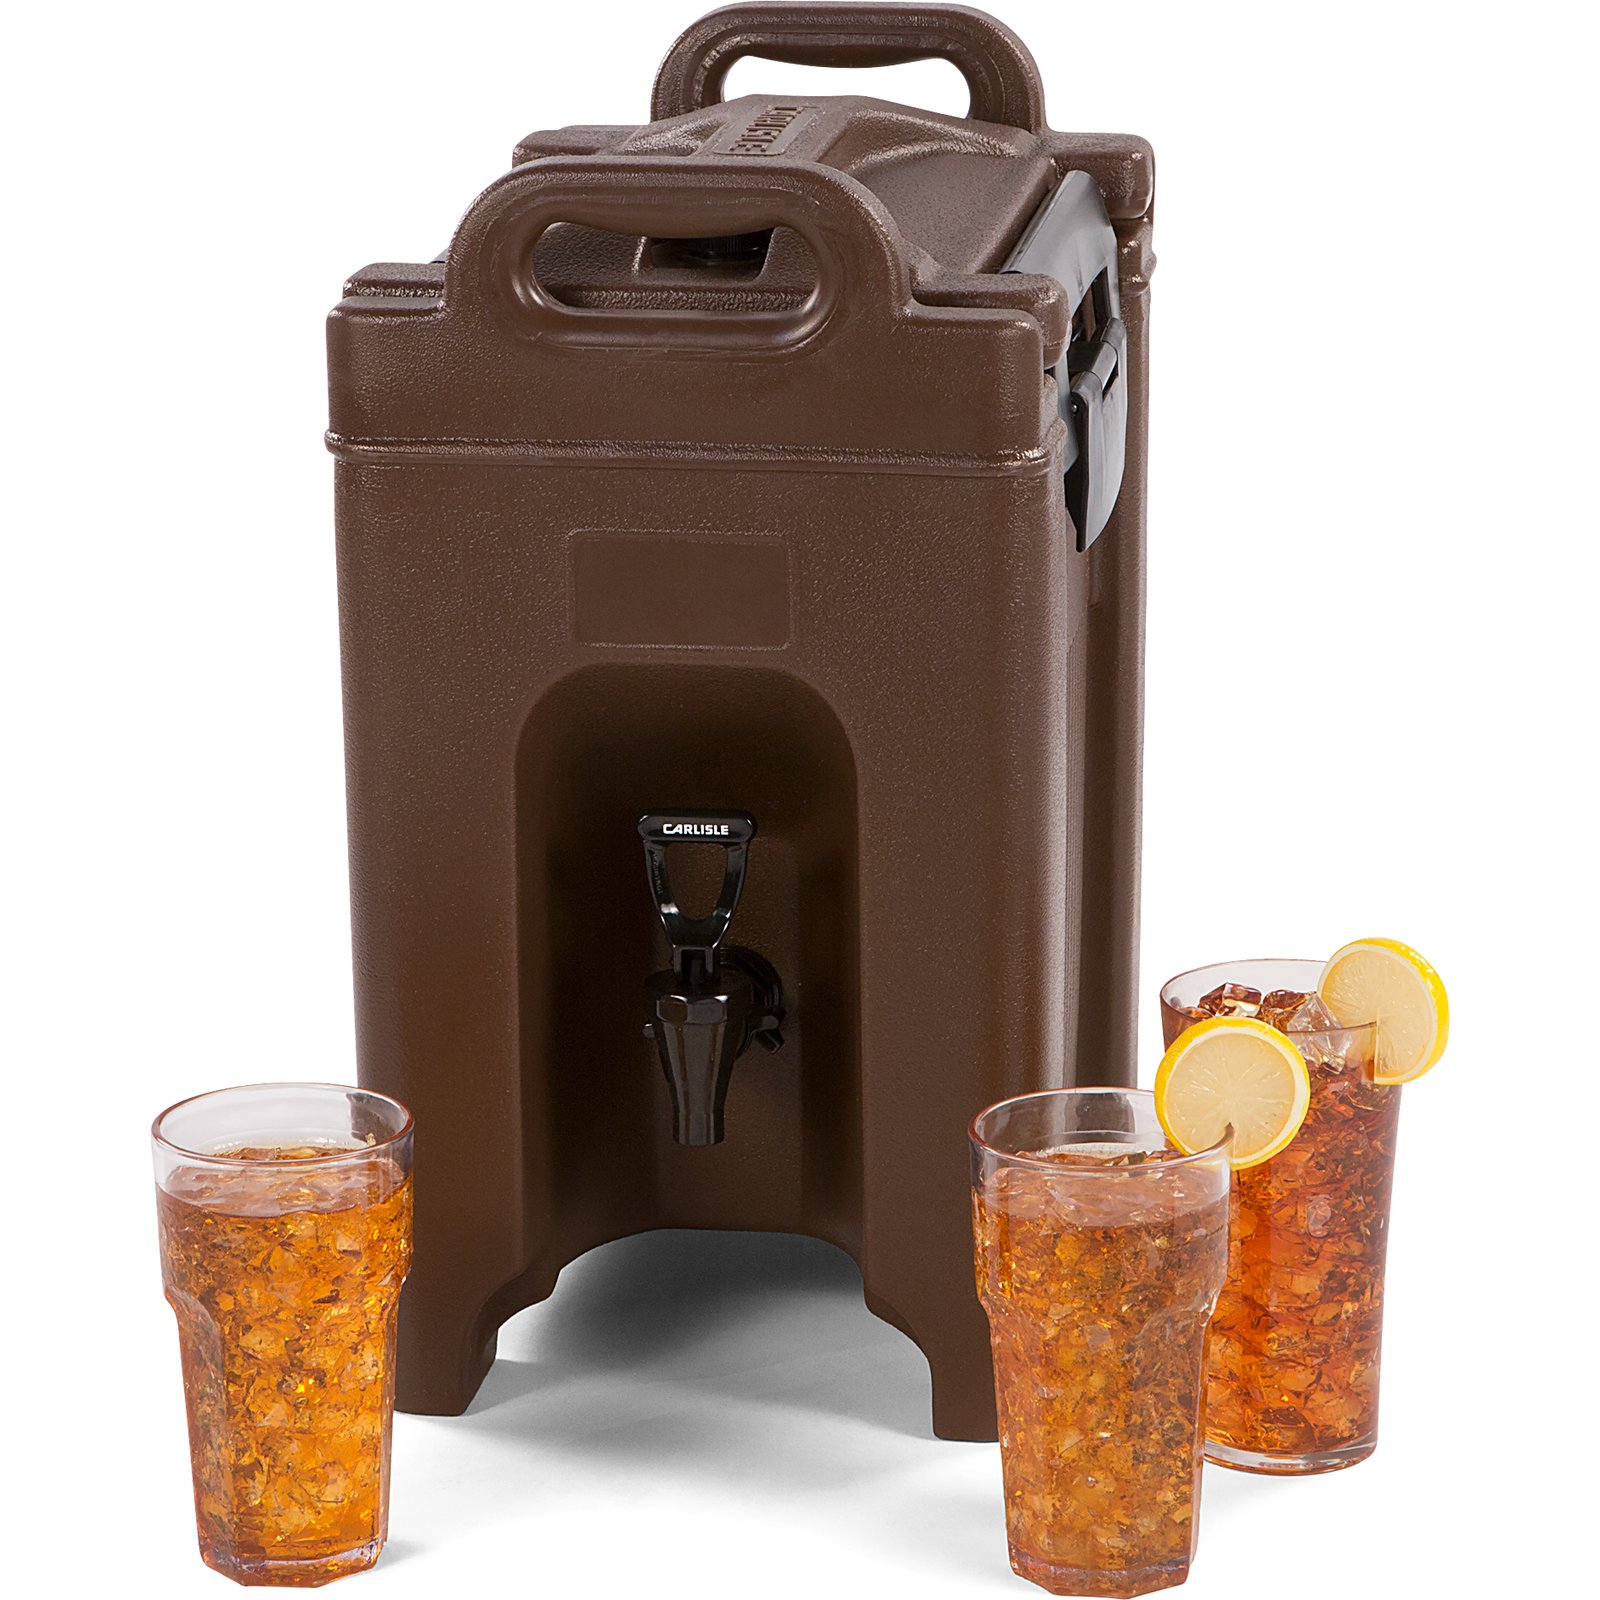 Cambro Container 2.5 Gal Thermal Insulated Beverage Dispenser | 250LCD |  Choose Color